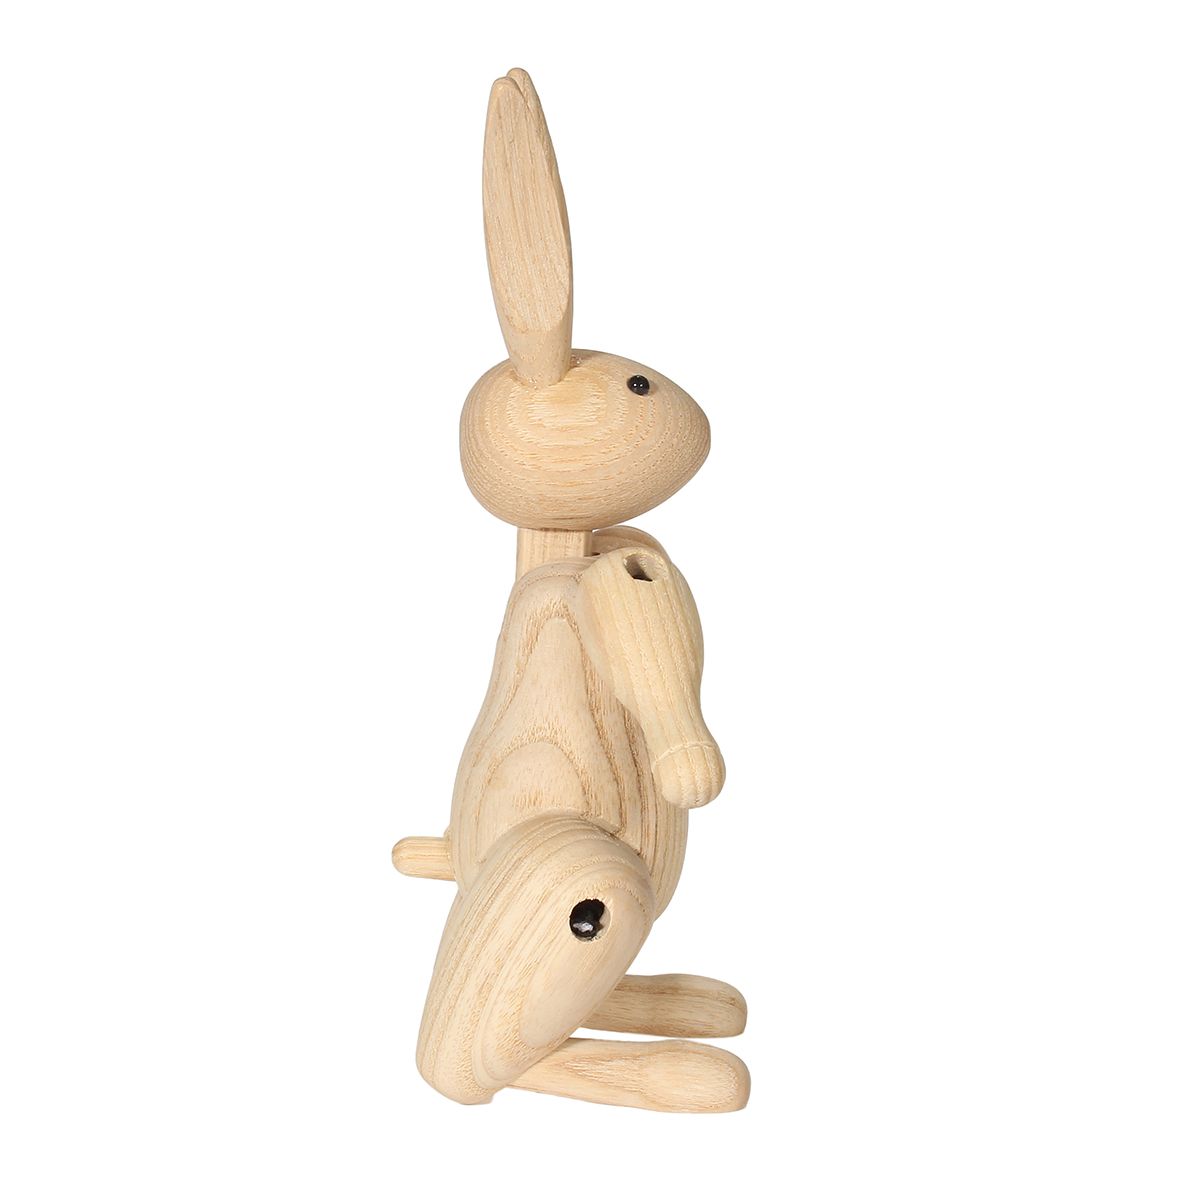 Wood-Carving-Miss-Rabbit-Figurines-Joints-Puppets-Animal-Art-Home-Decoration-Crafts-1241724